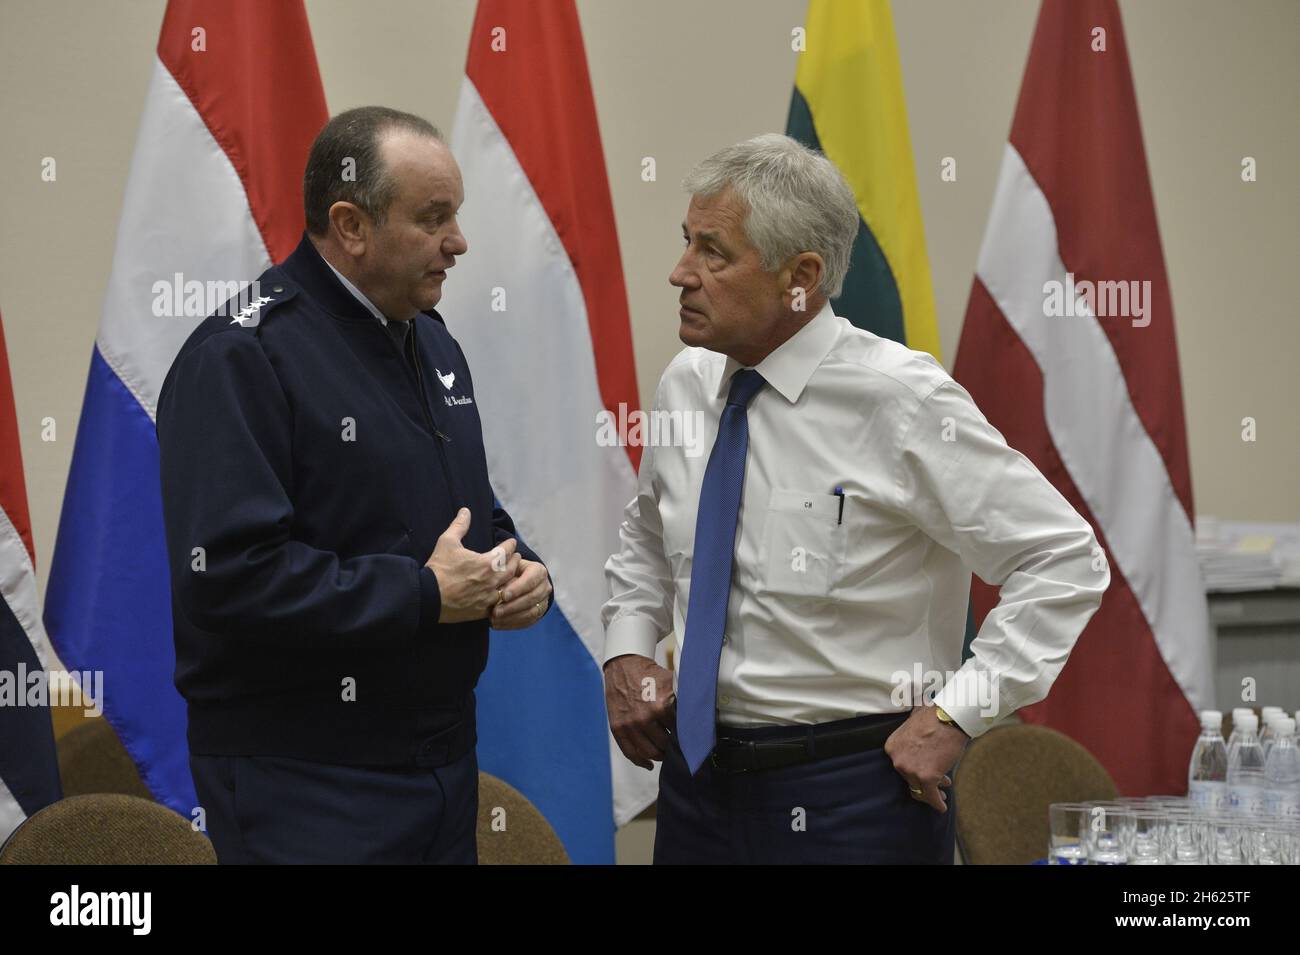 Supreme Allied Commander Europe U.S. Air Force General Philip Breedlove, left, speaks with Secretary of Defense Chuck Hagel during a meeting of NATO defense ministers Feb. 26, 2014 Stock Photo